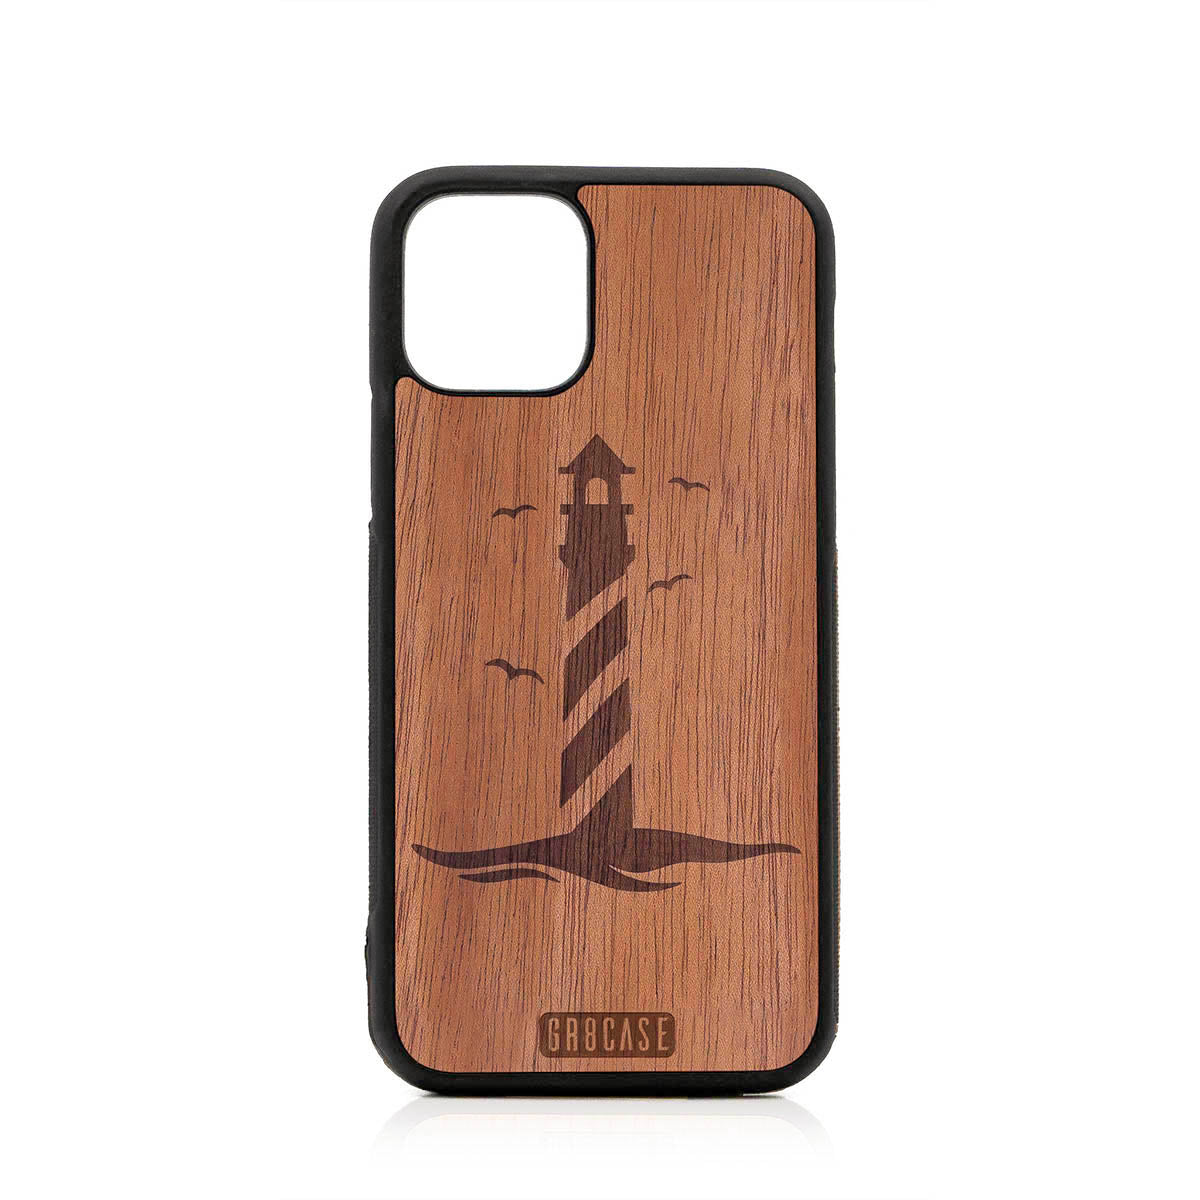 Lighthouse Design Wood Case For iPhone 11 Pro